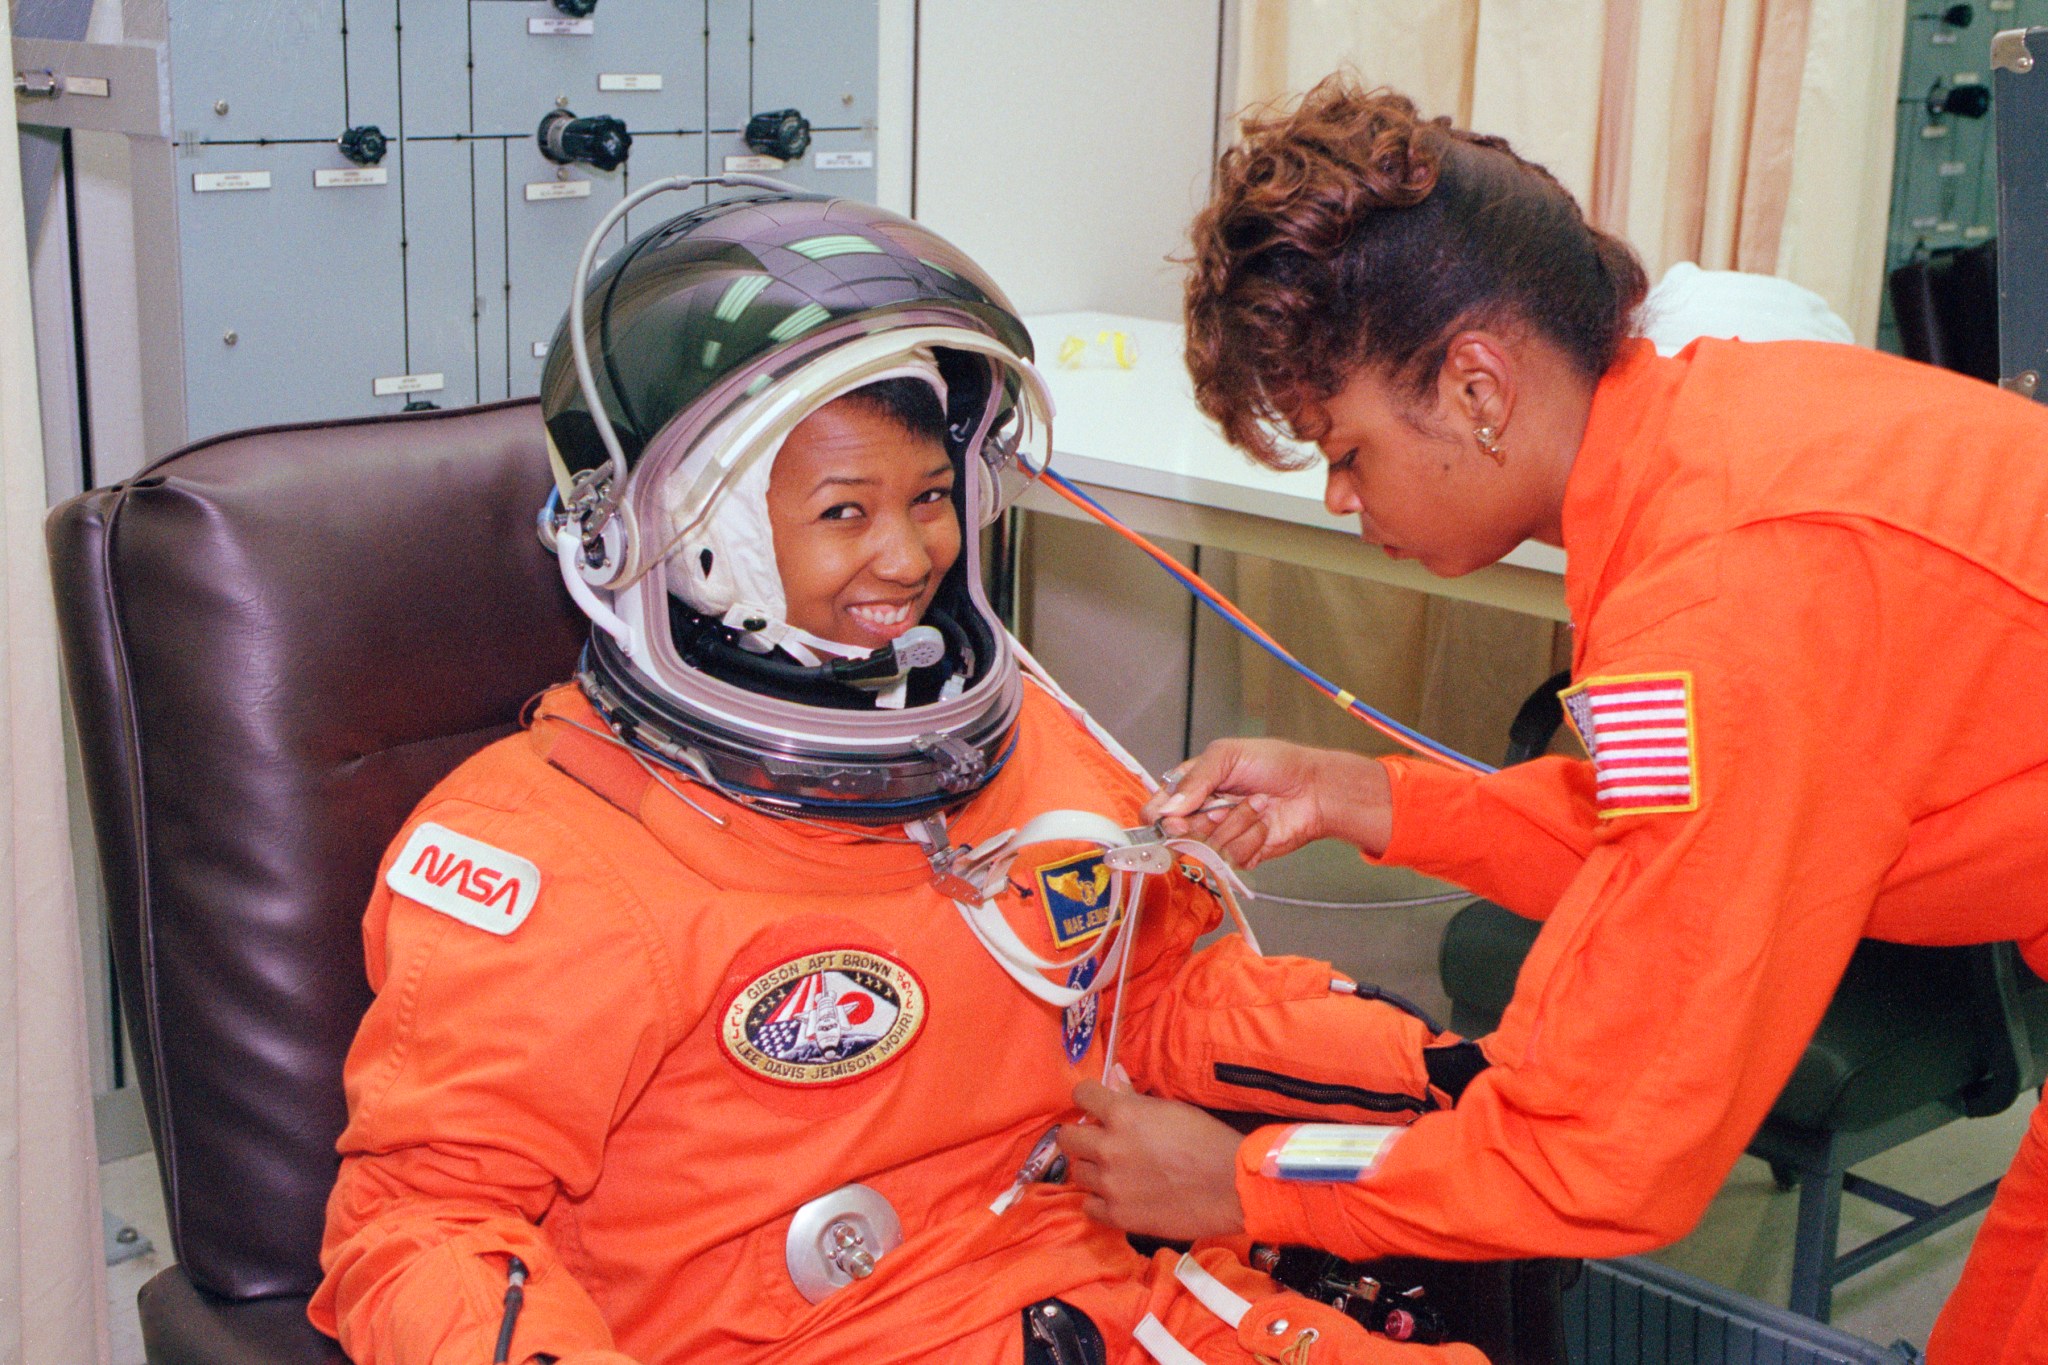 Mae Jemison suits up for the STS-47 mission aboard Endeavour. Jemison was the first African-American astronaut in space.